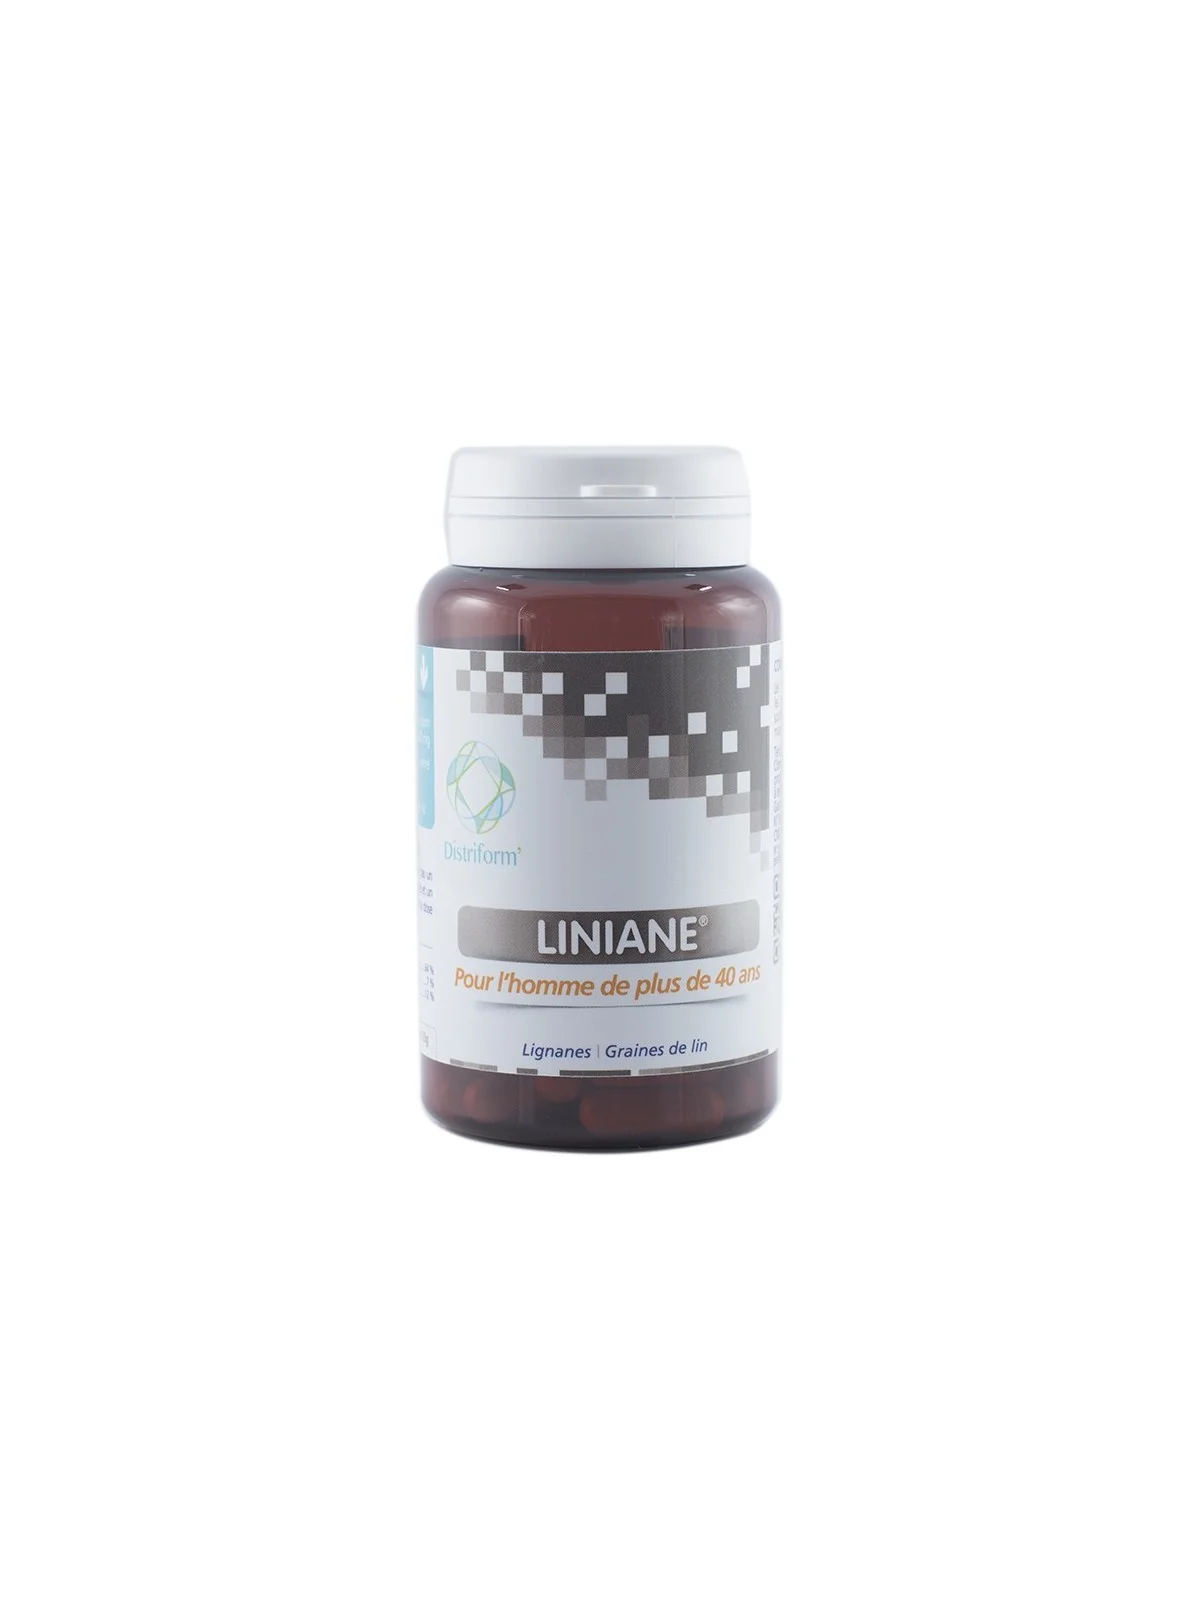 Liniane Confort urinaire Homme BioAxo Form'axe